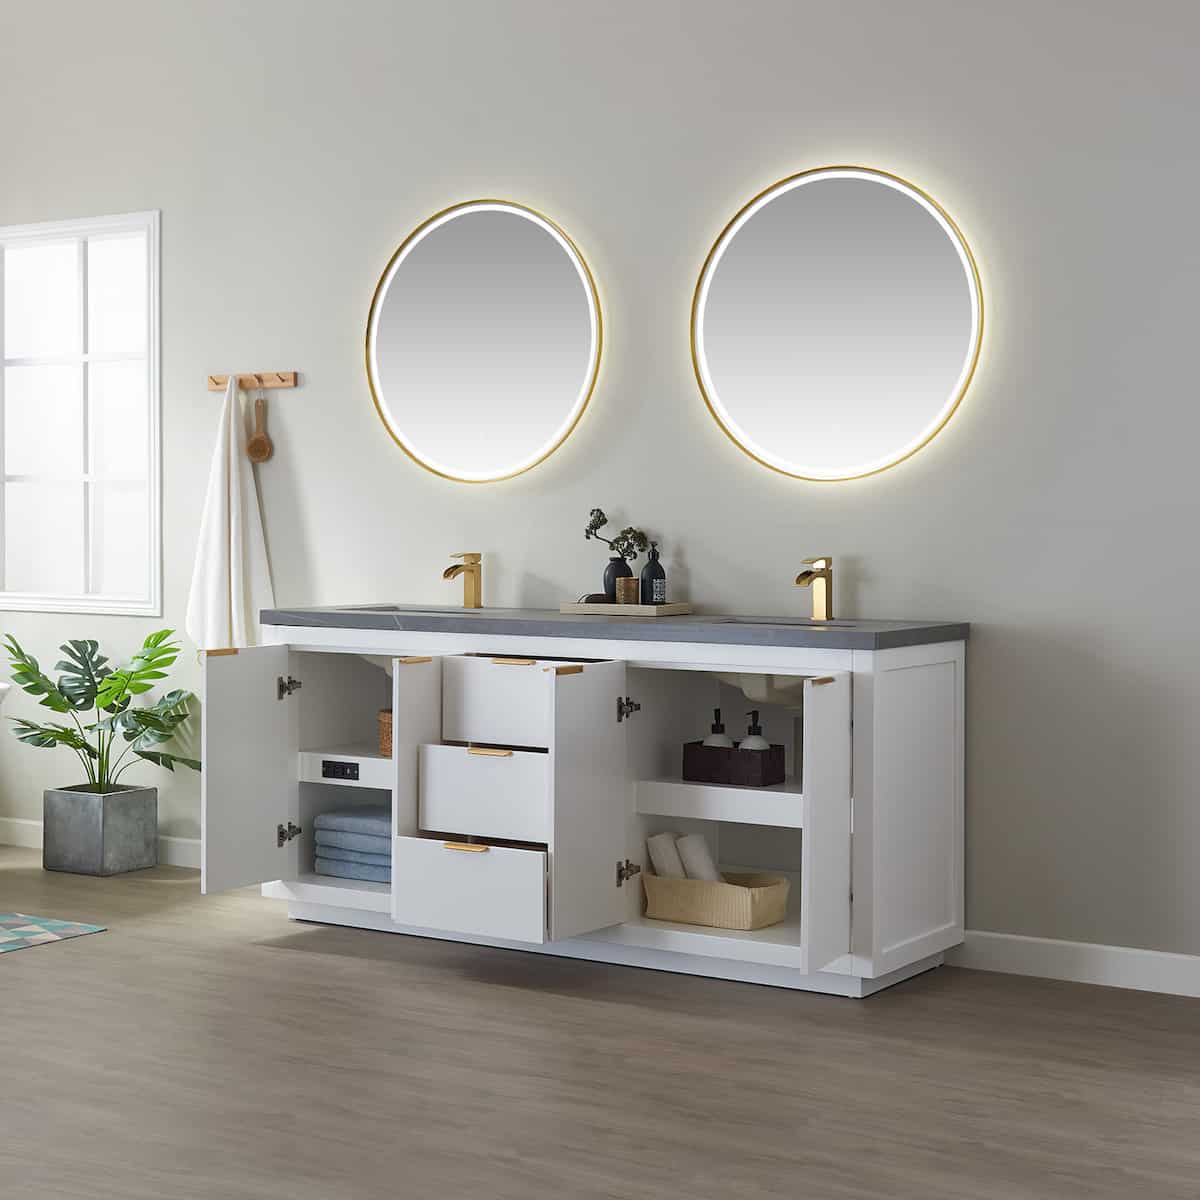 Vinnova Leiza 72 Inch Freestanding Double Vanity in White with Grey Sintered Stone Countertop With Mirror Inside 701572-WH-ALB